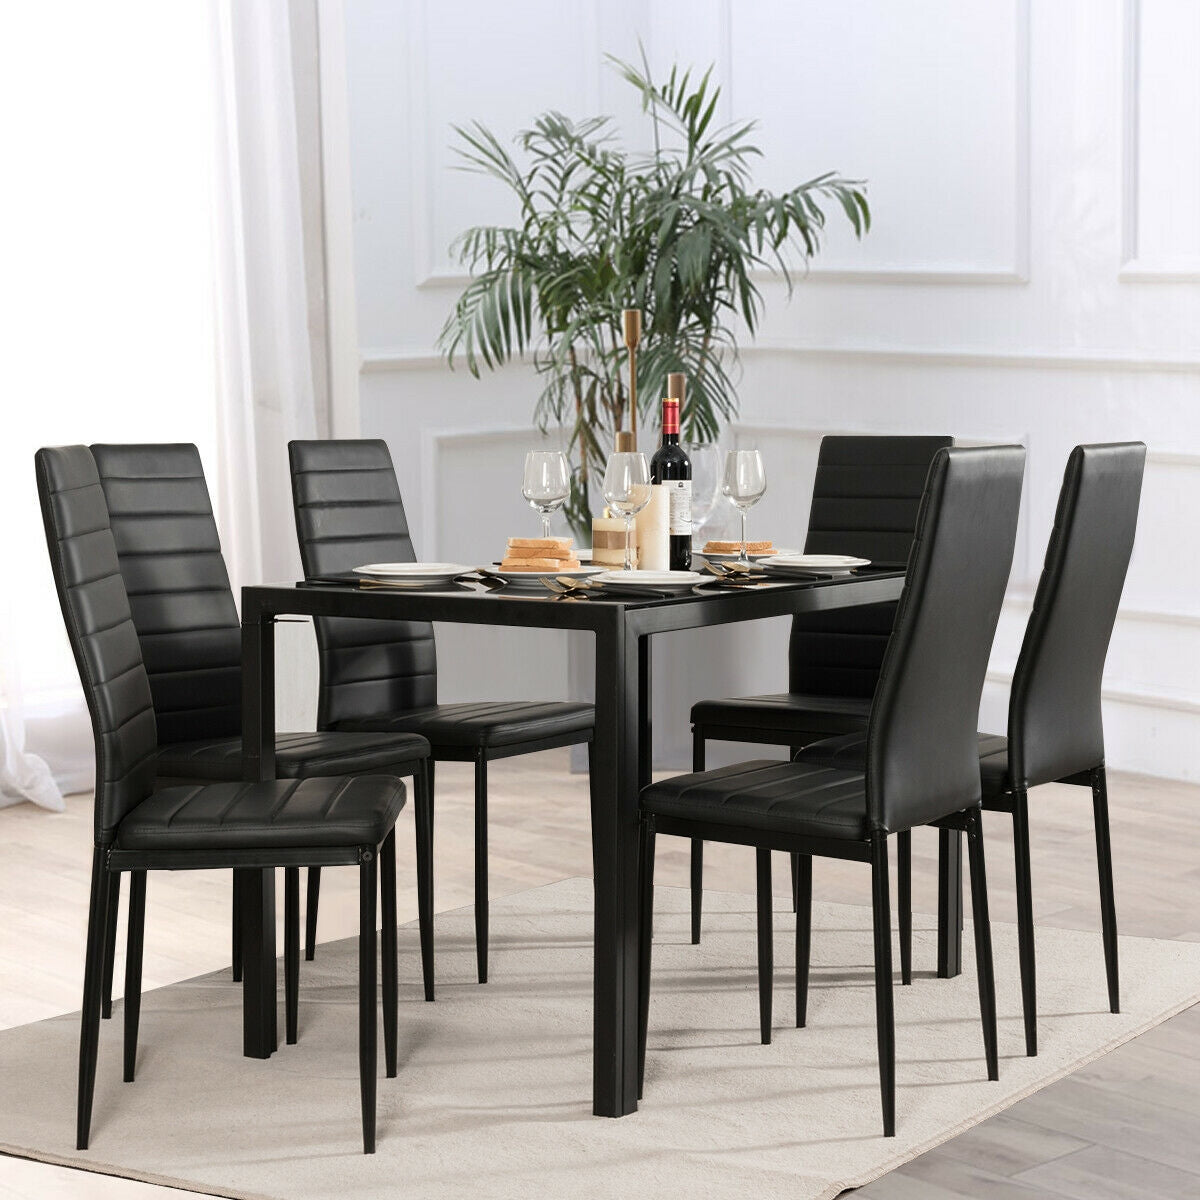 Set of 6 High Back Dining Chairs at Gallery Canada